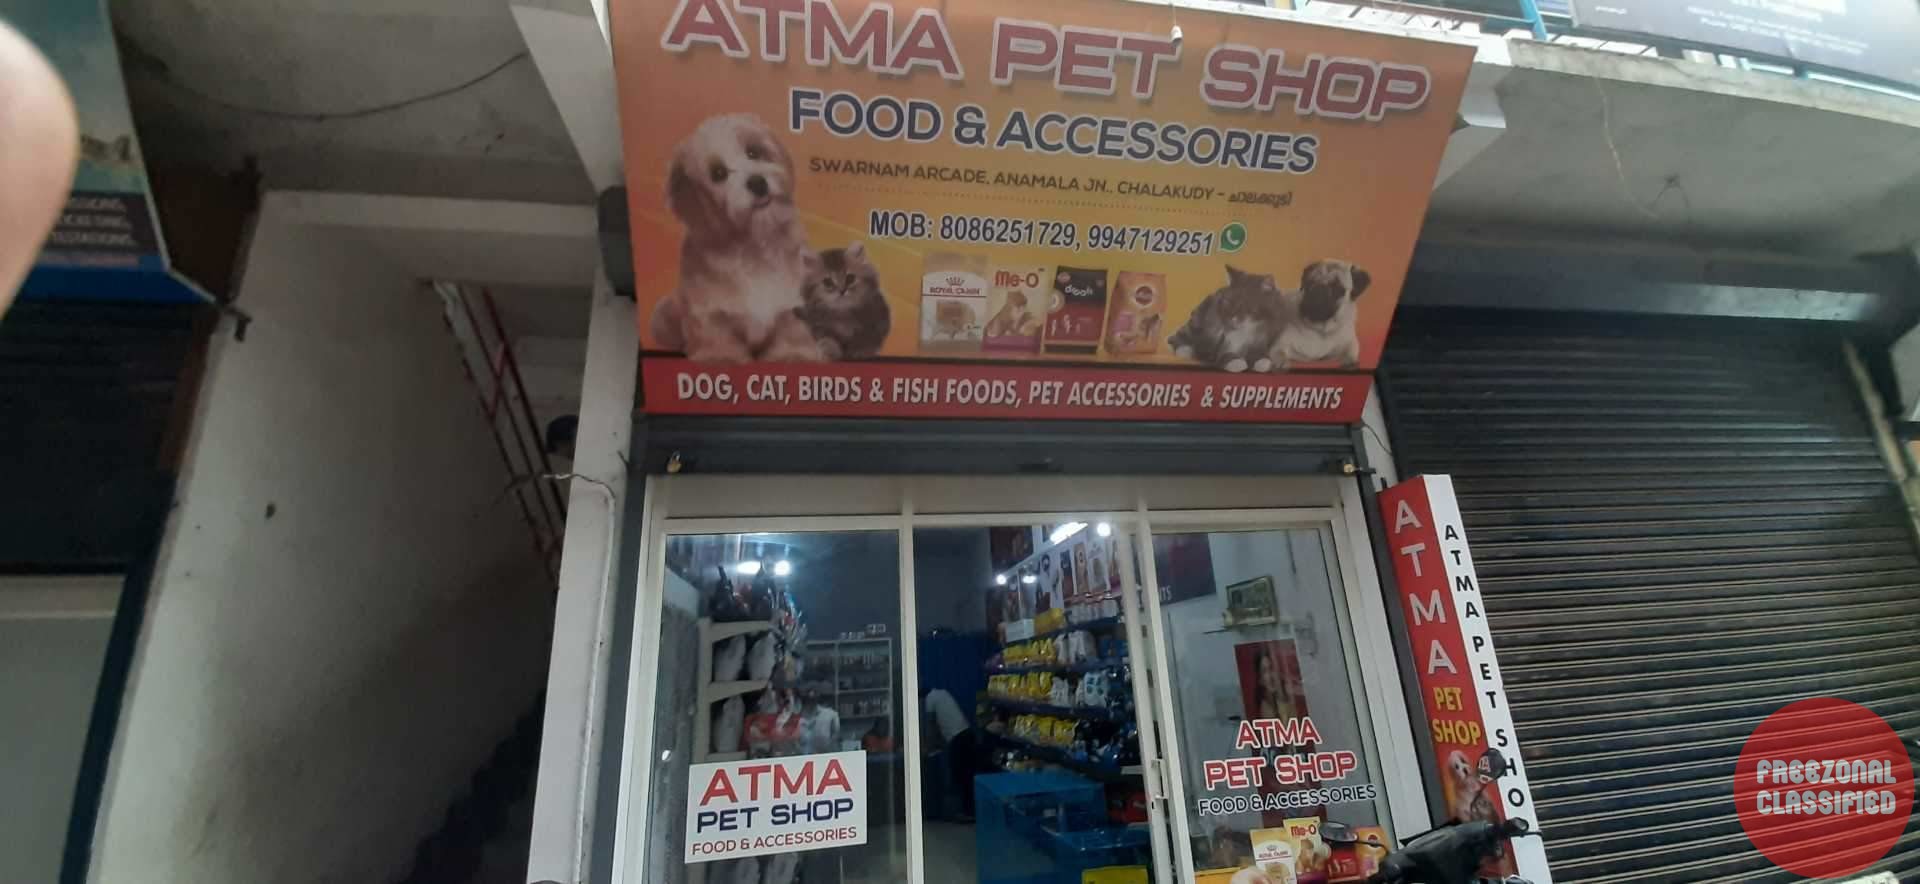 Atma Pet Shop Pet Shop in Chalakudy, Thrissur, Kerala Reviews, OFFERS,  Contact Numbers, Details, Rating